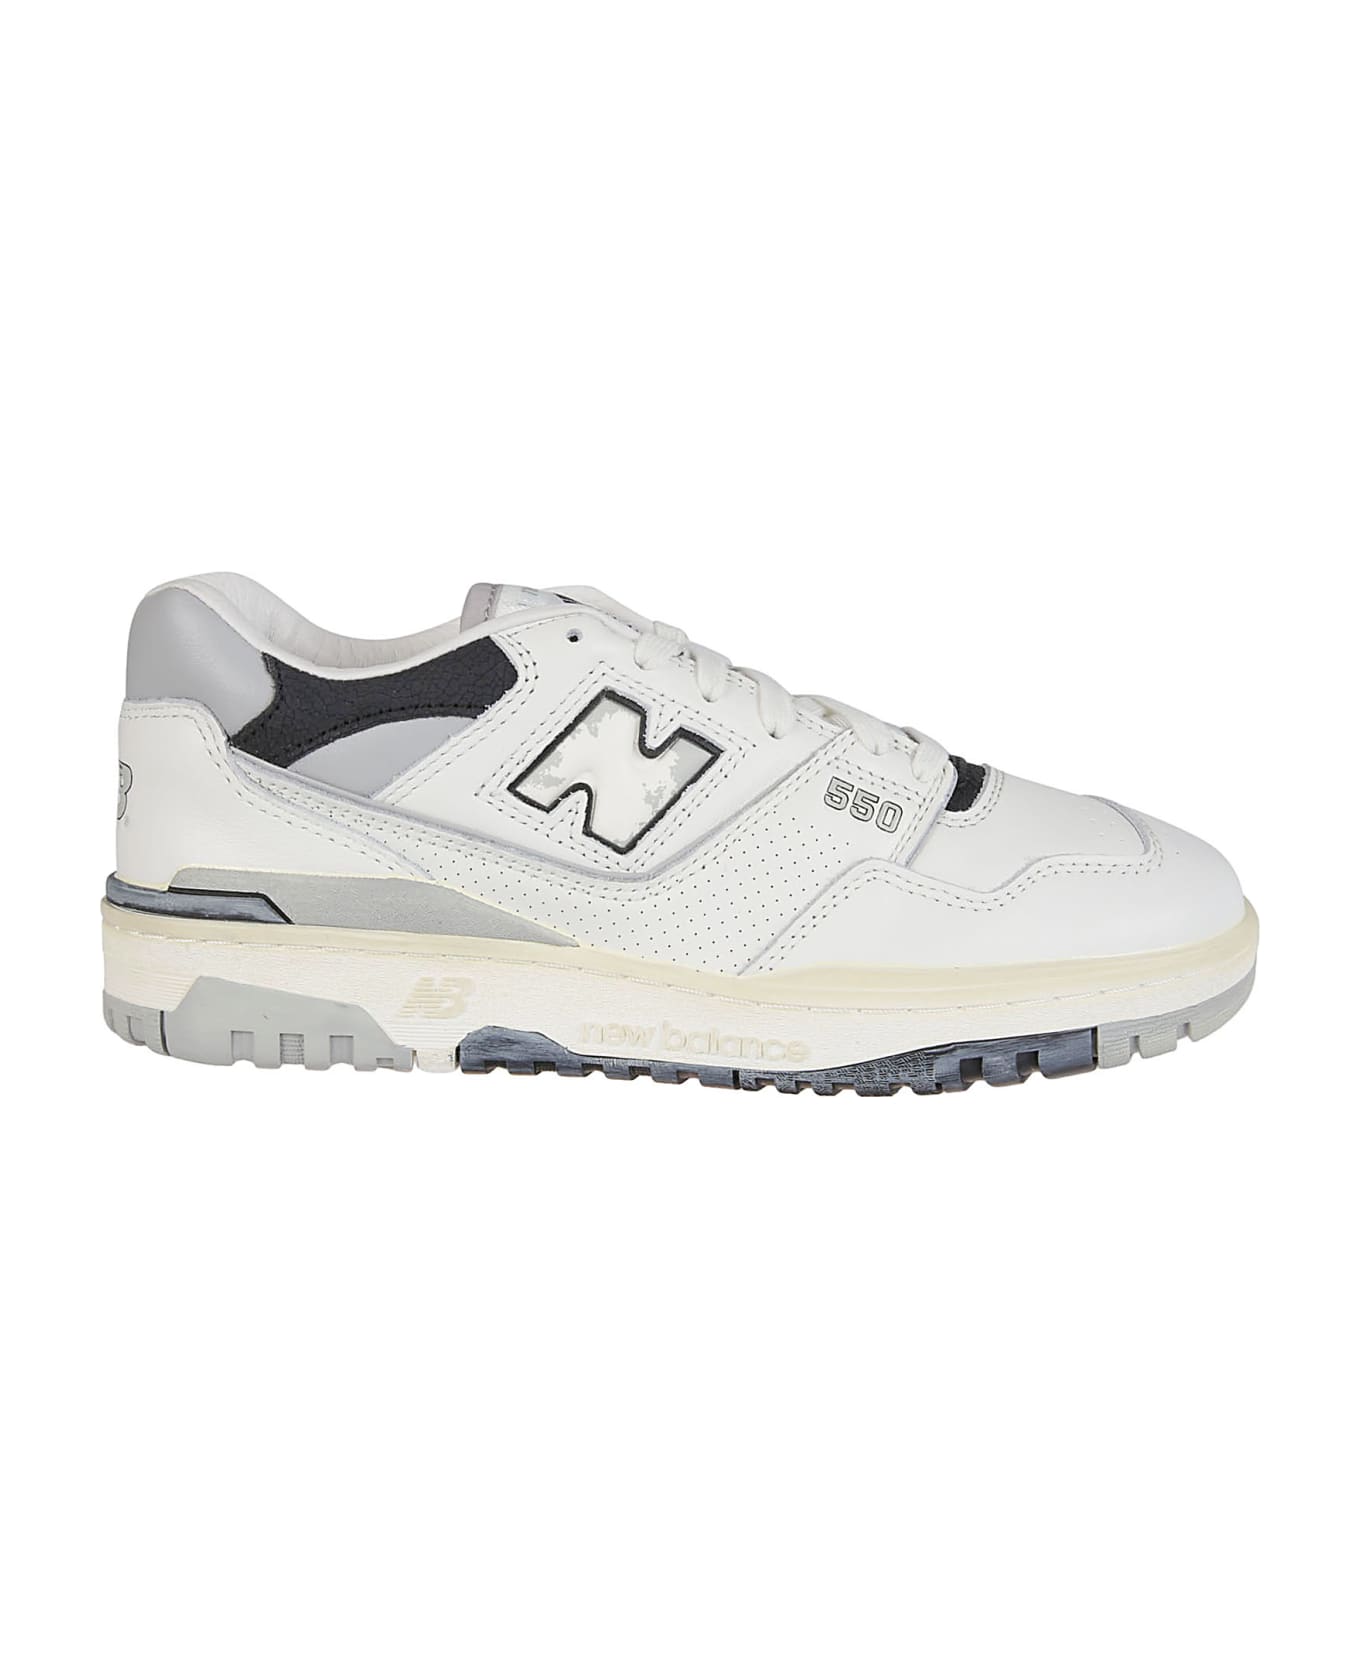 New Balance 550 Sneakers - Off White/grey スニーカー